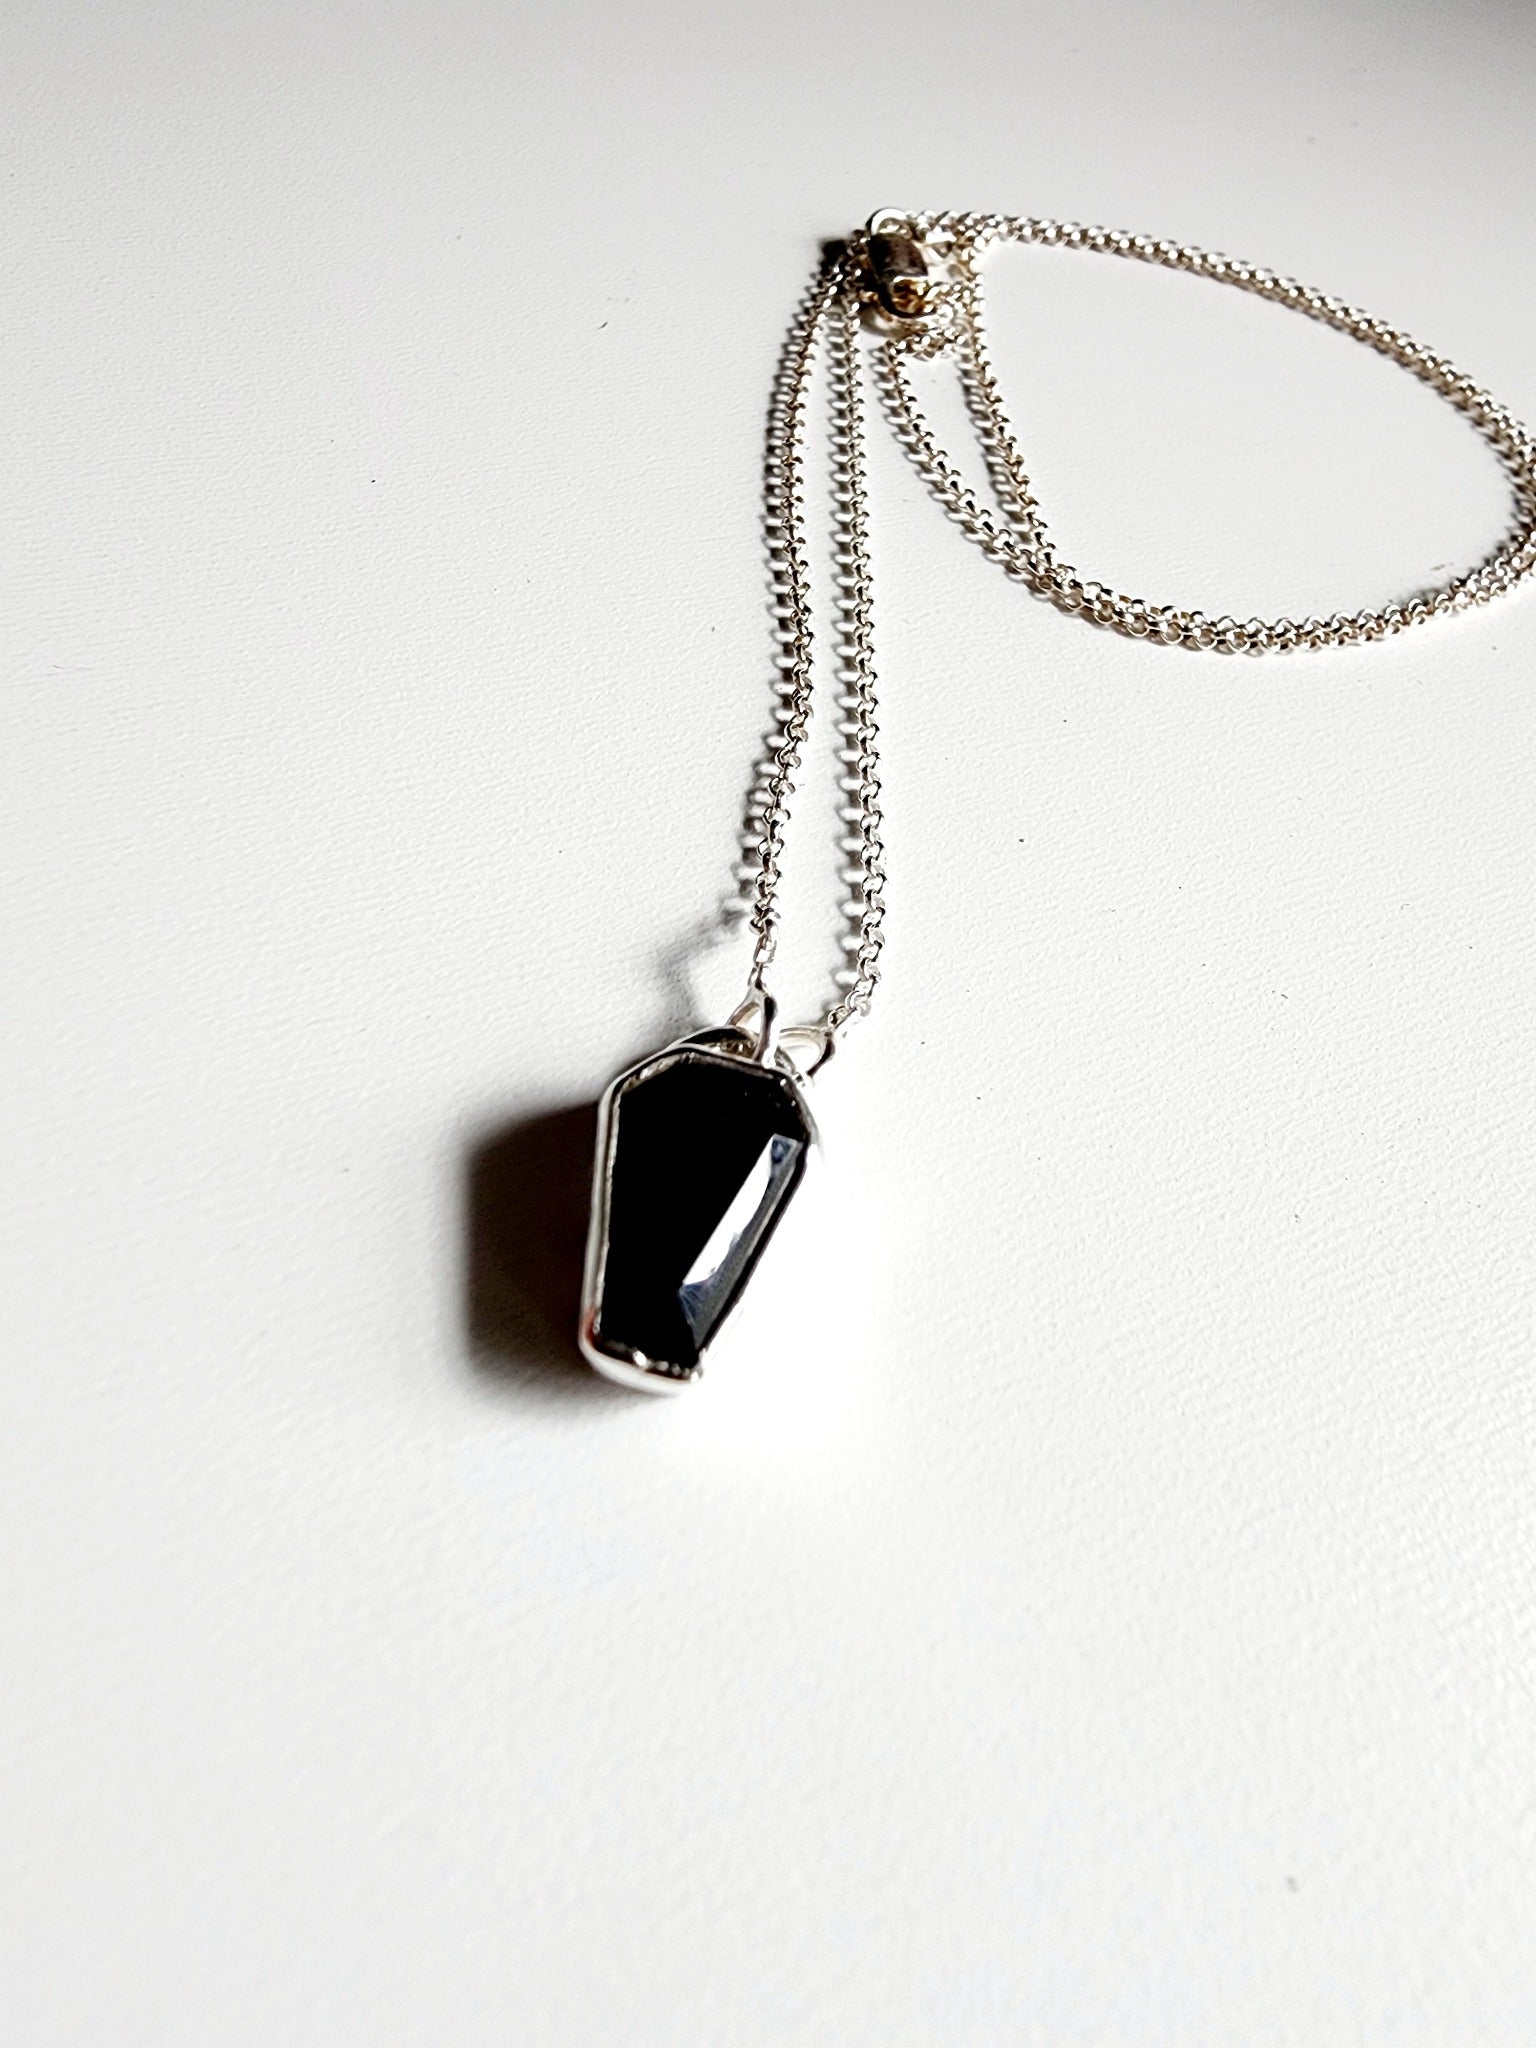 Small onyx black stone in a coffin shape on a simple sterling silver necklace